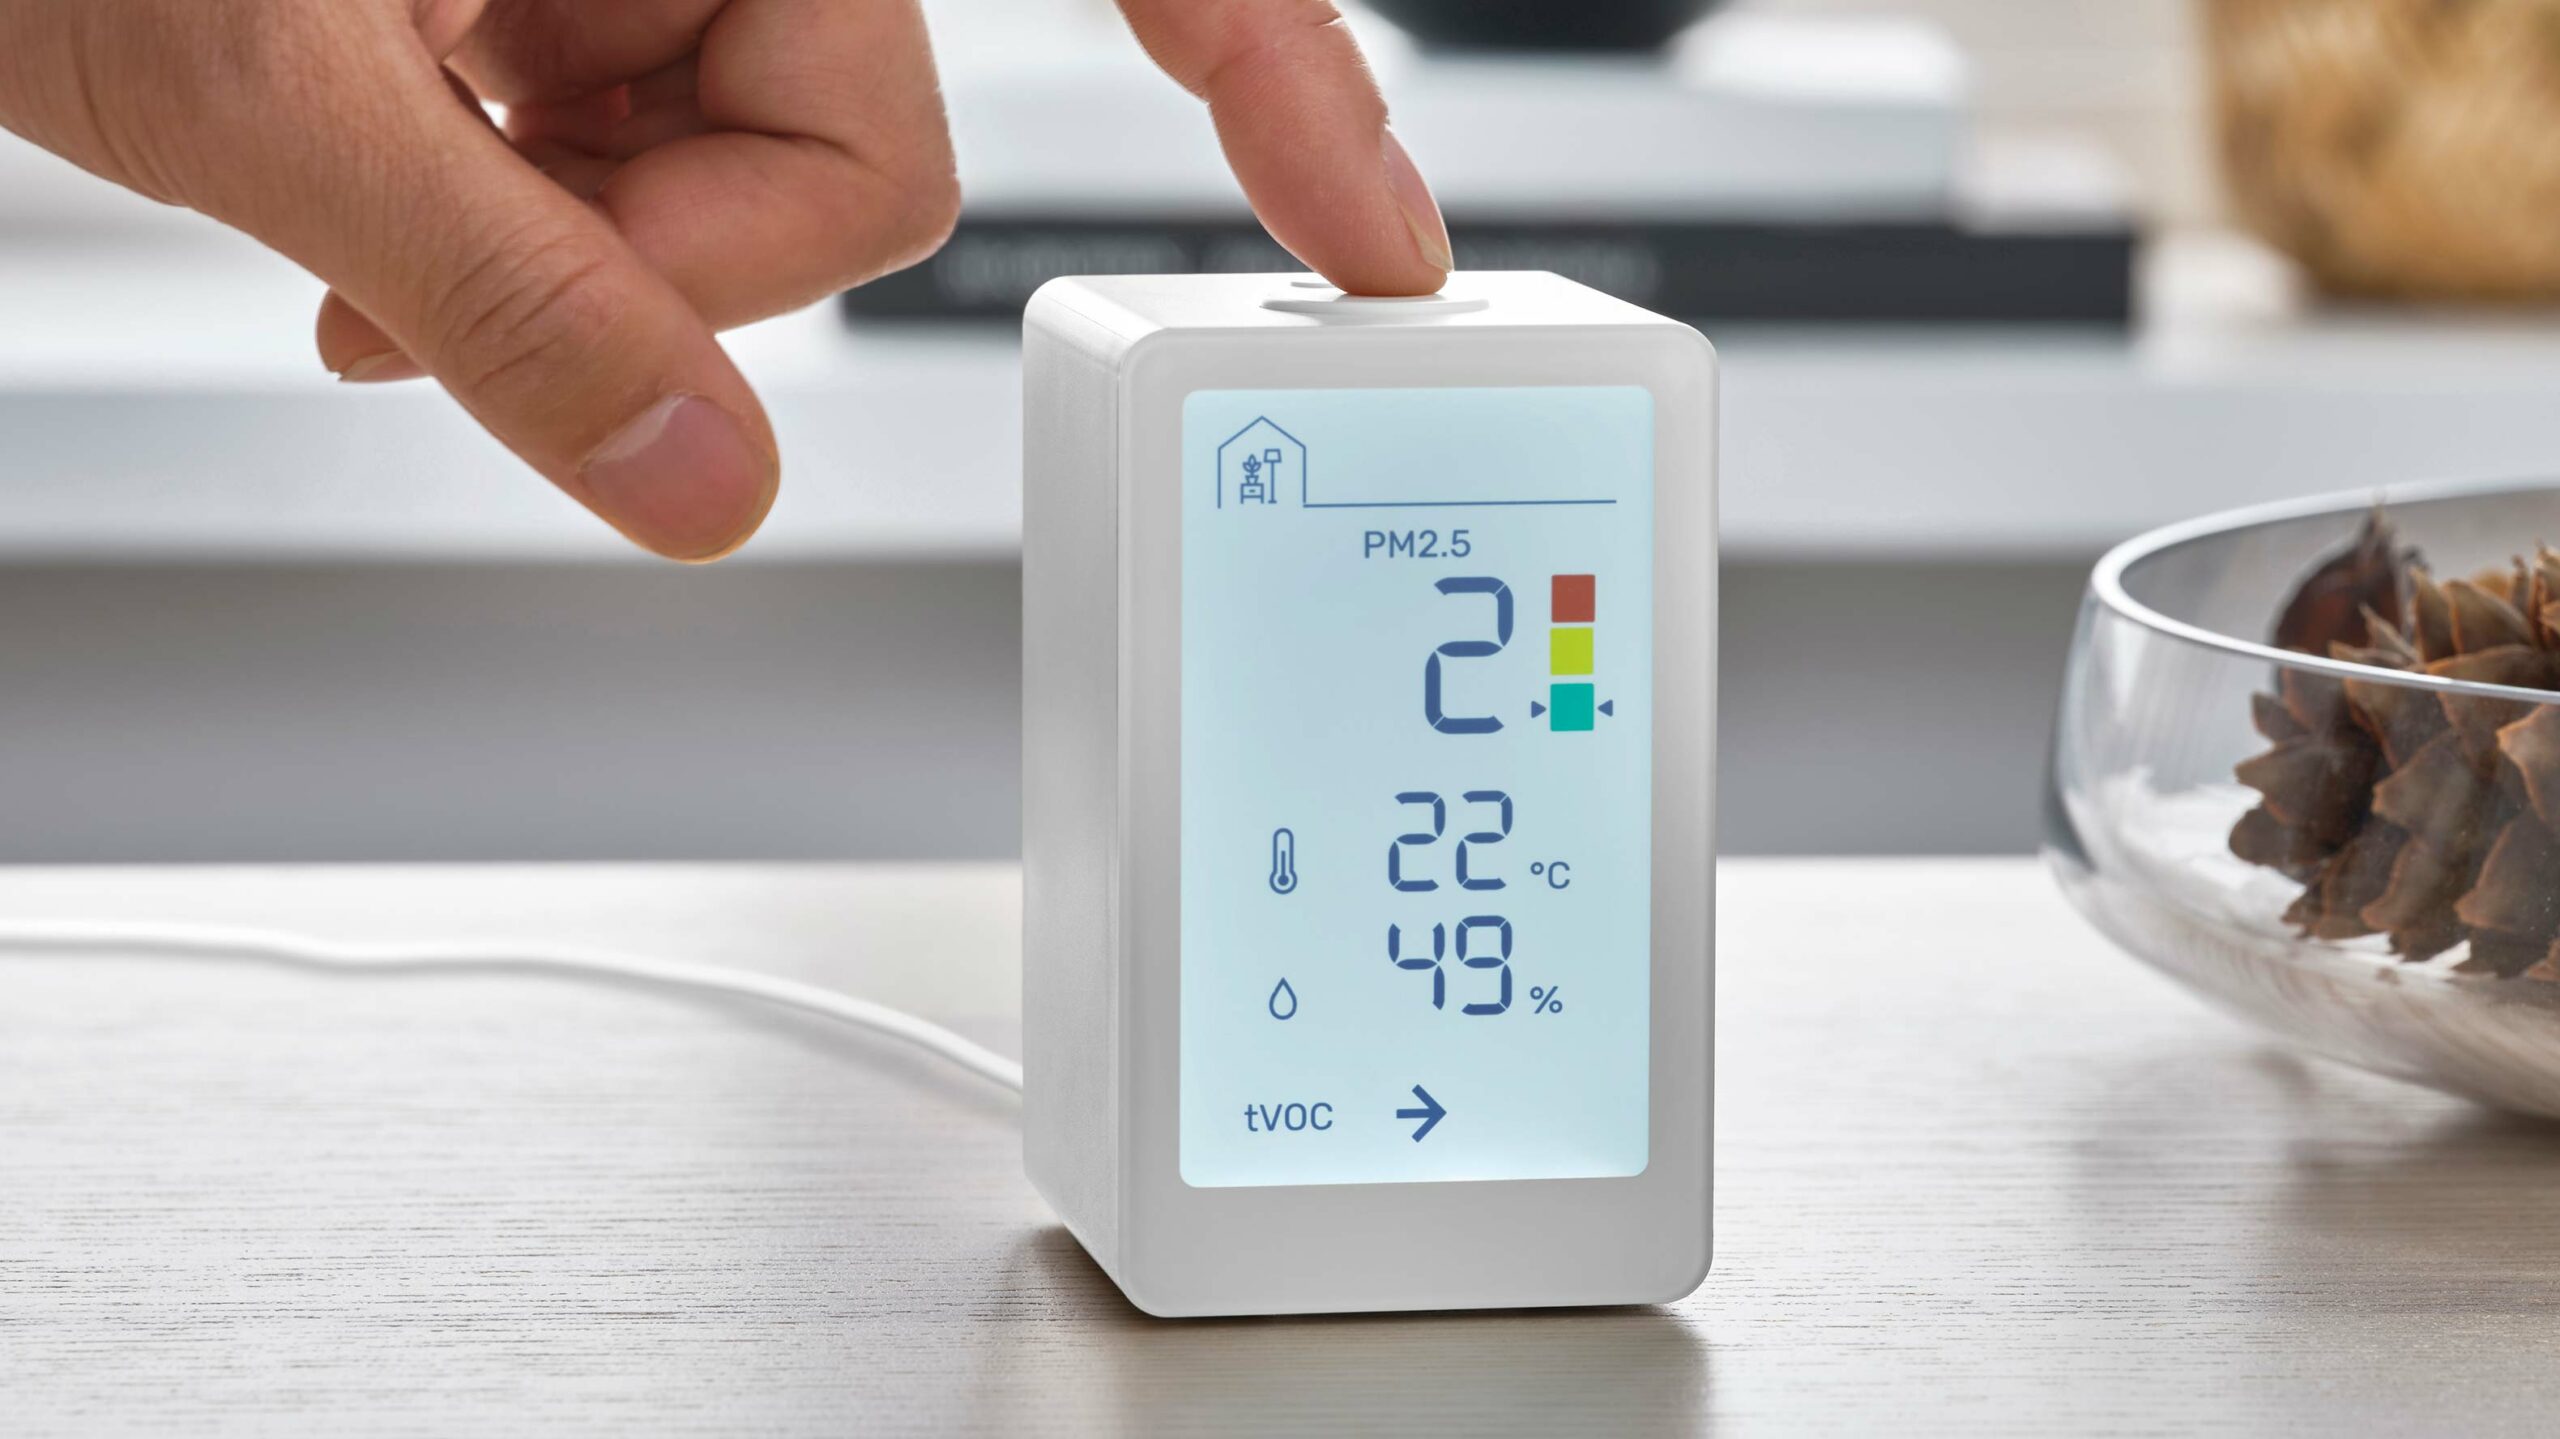 Ikea launches new smart sensor capable of monitoring indoor air quality